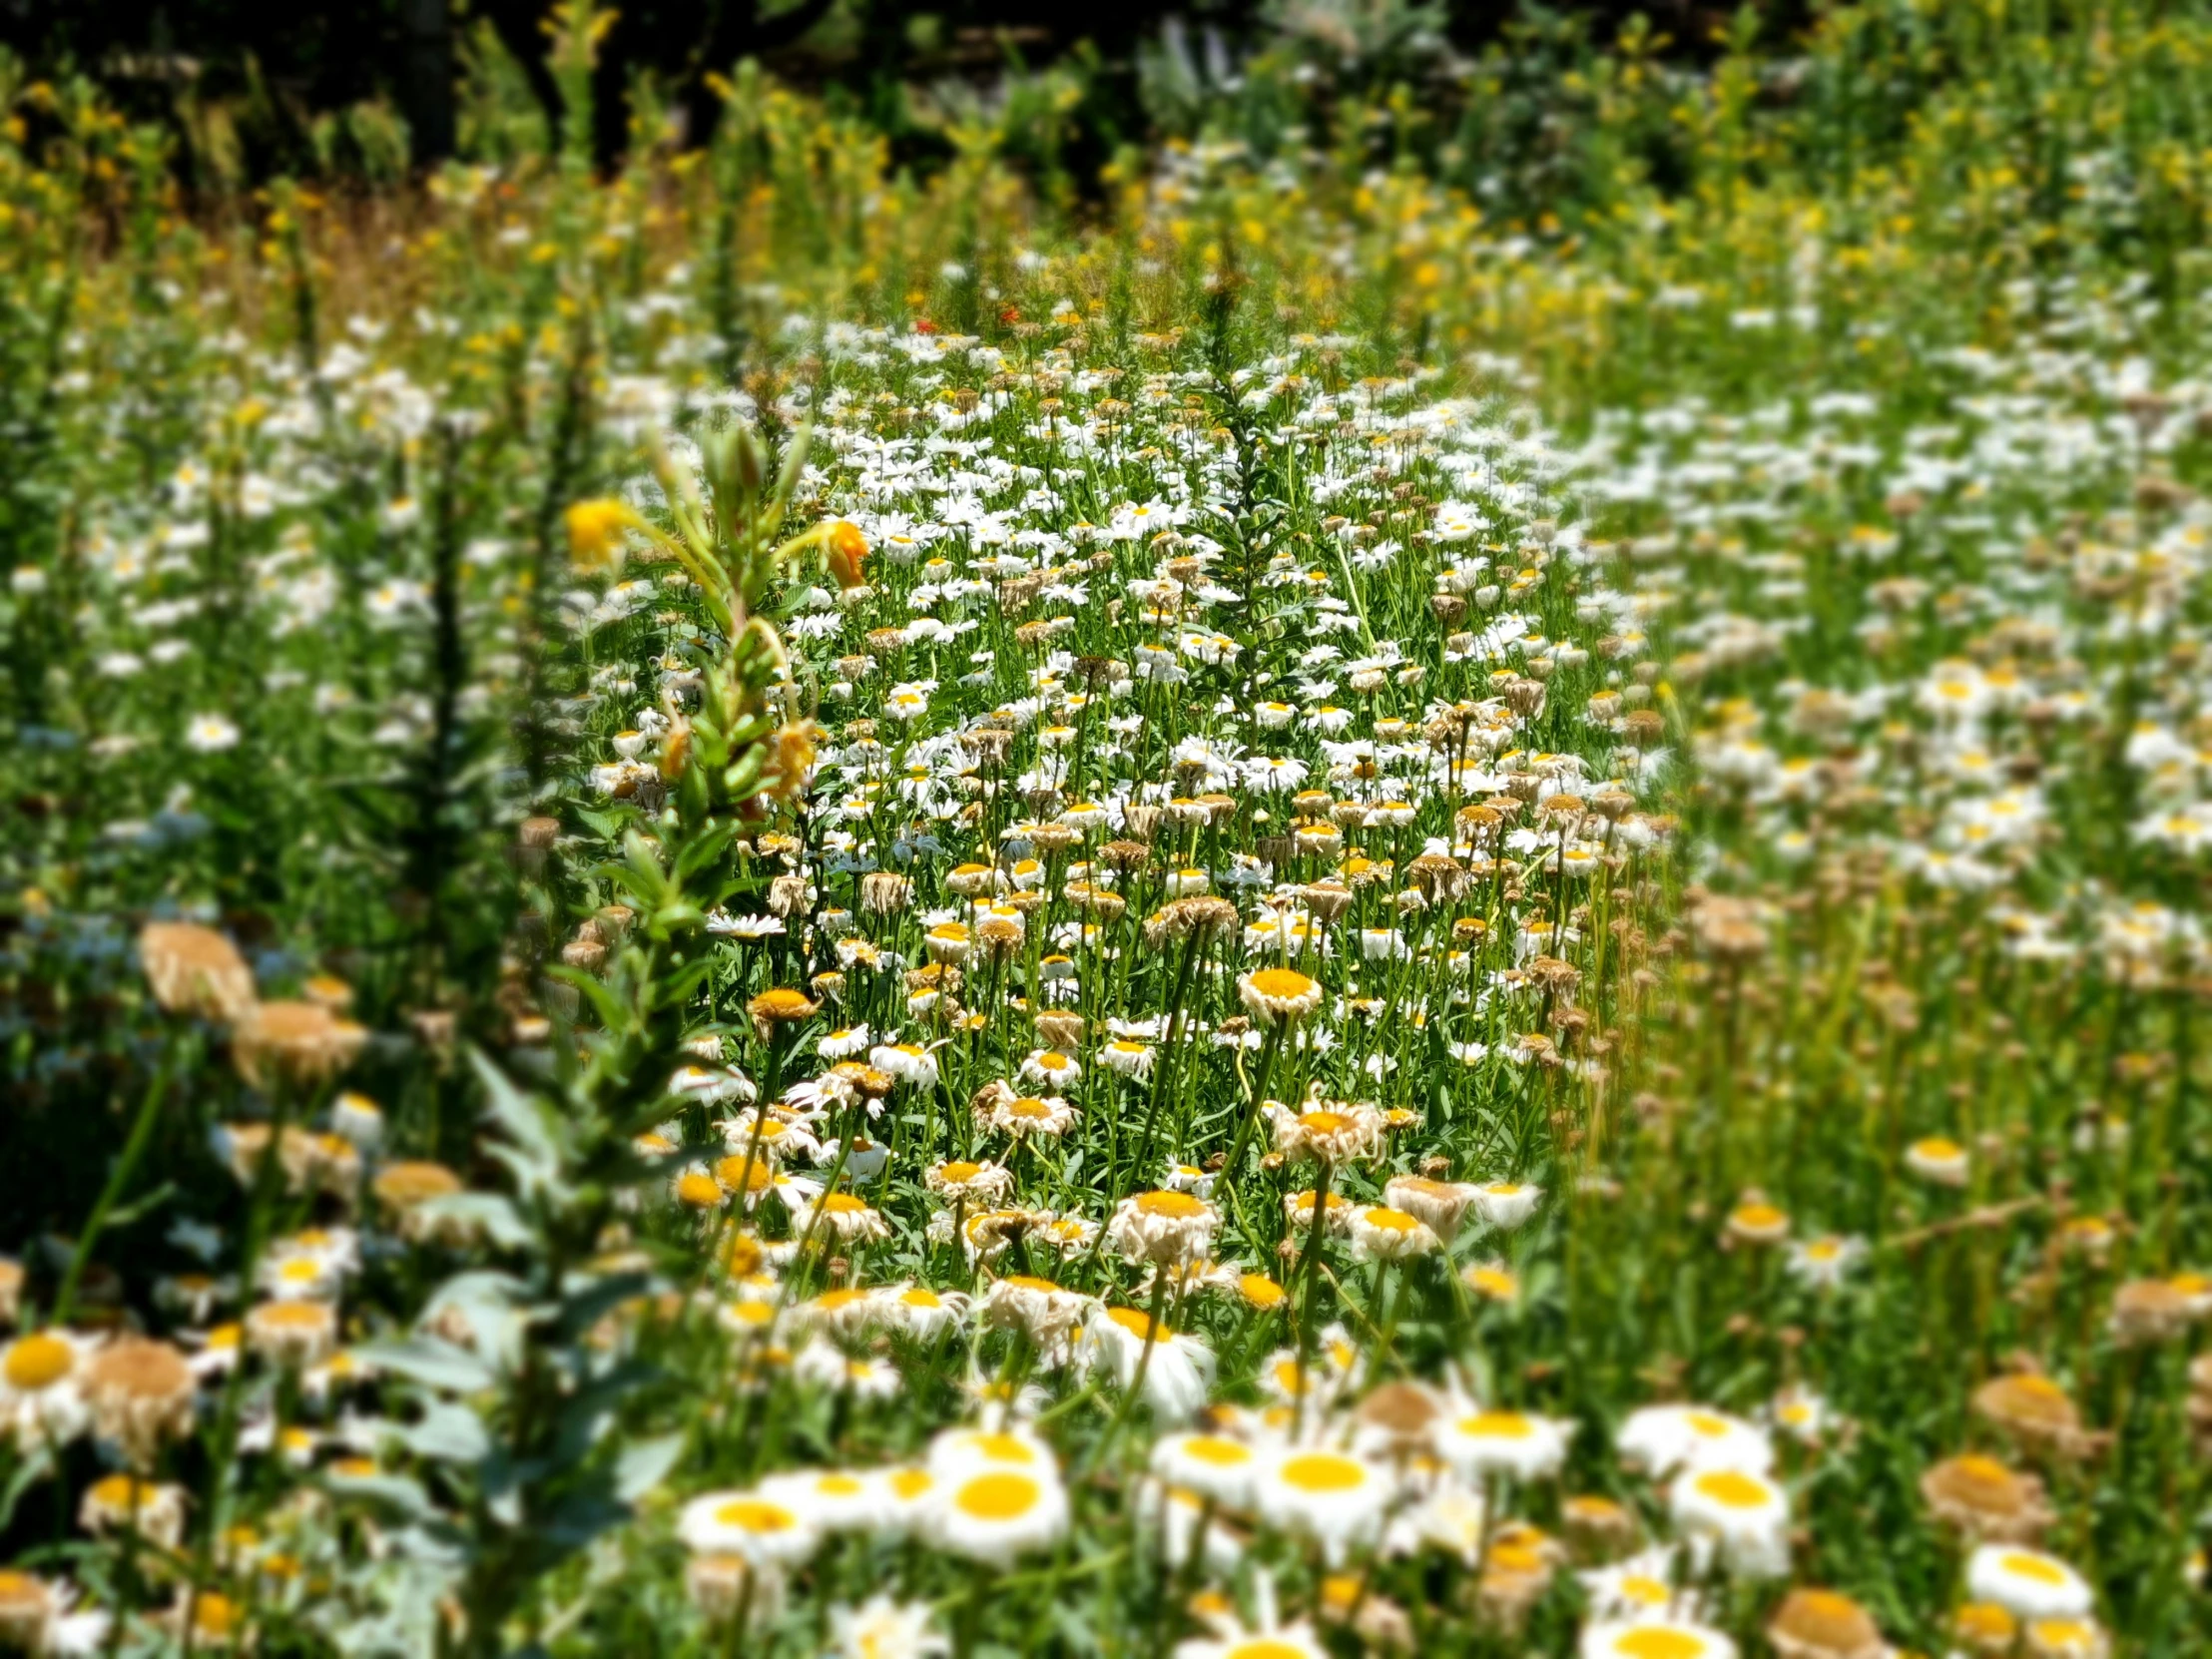 yellow and white flowers are growing in a field